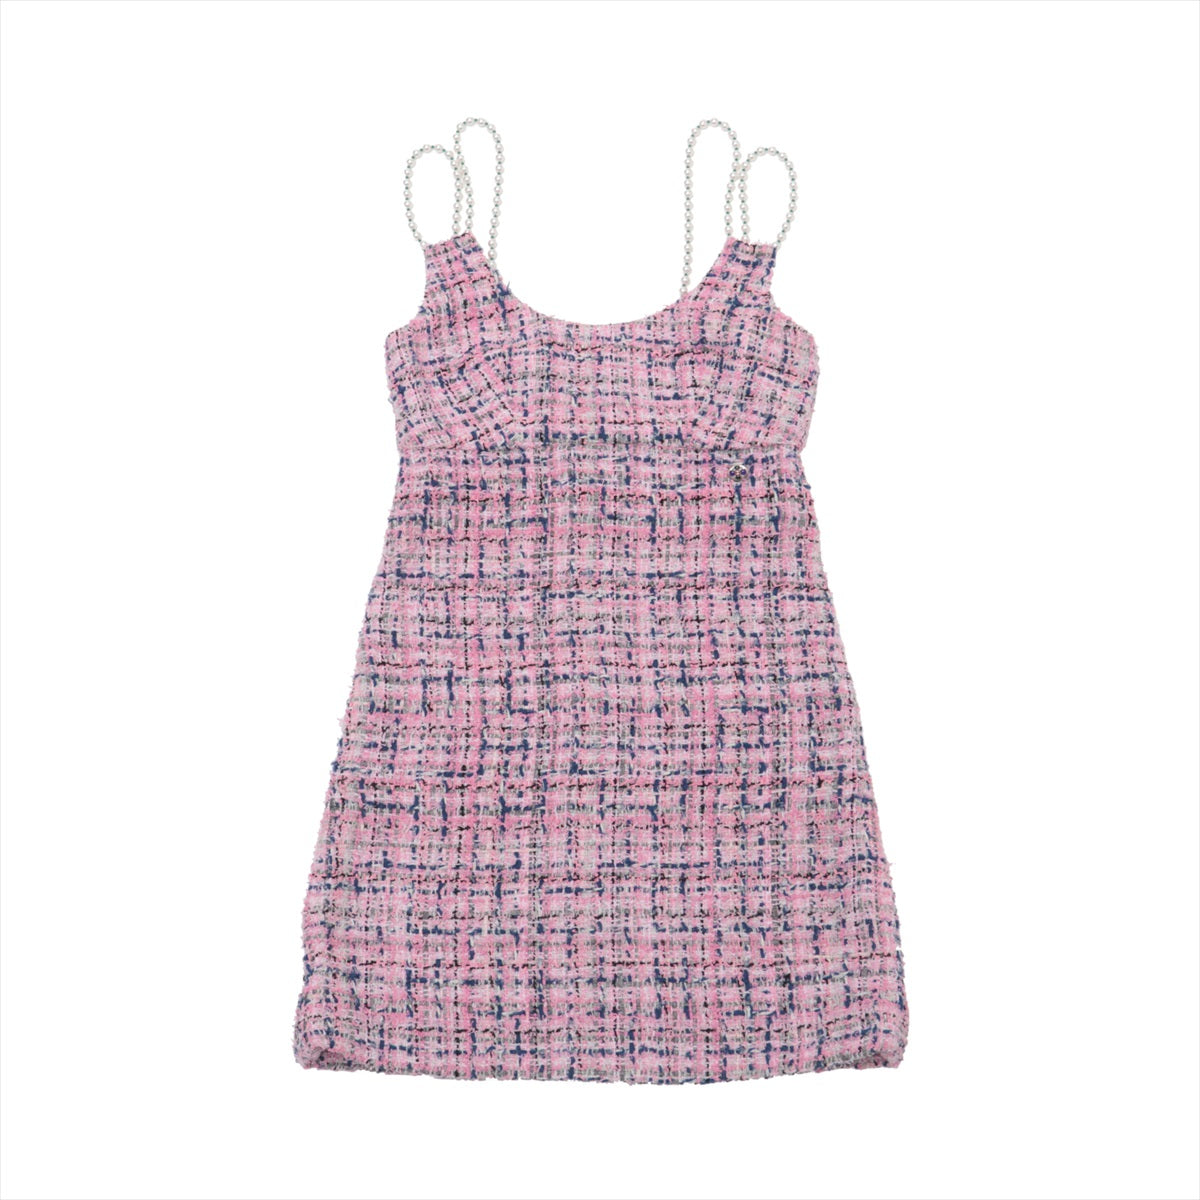 Chanel Coco Button P74 Cotton & Polyester Dress 34 Ladies' Pink  P74420 Gripoix Tweed Imitation pearls